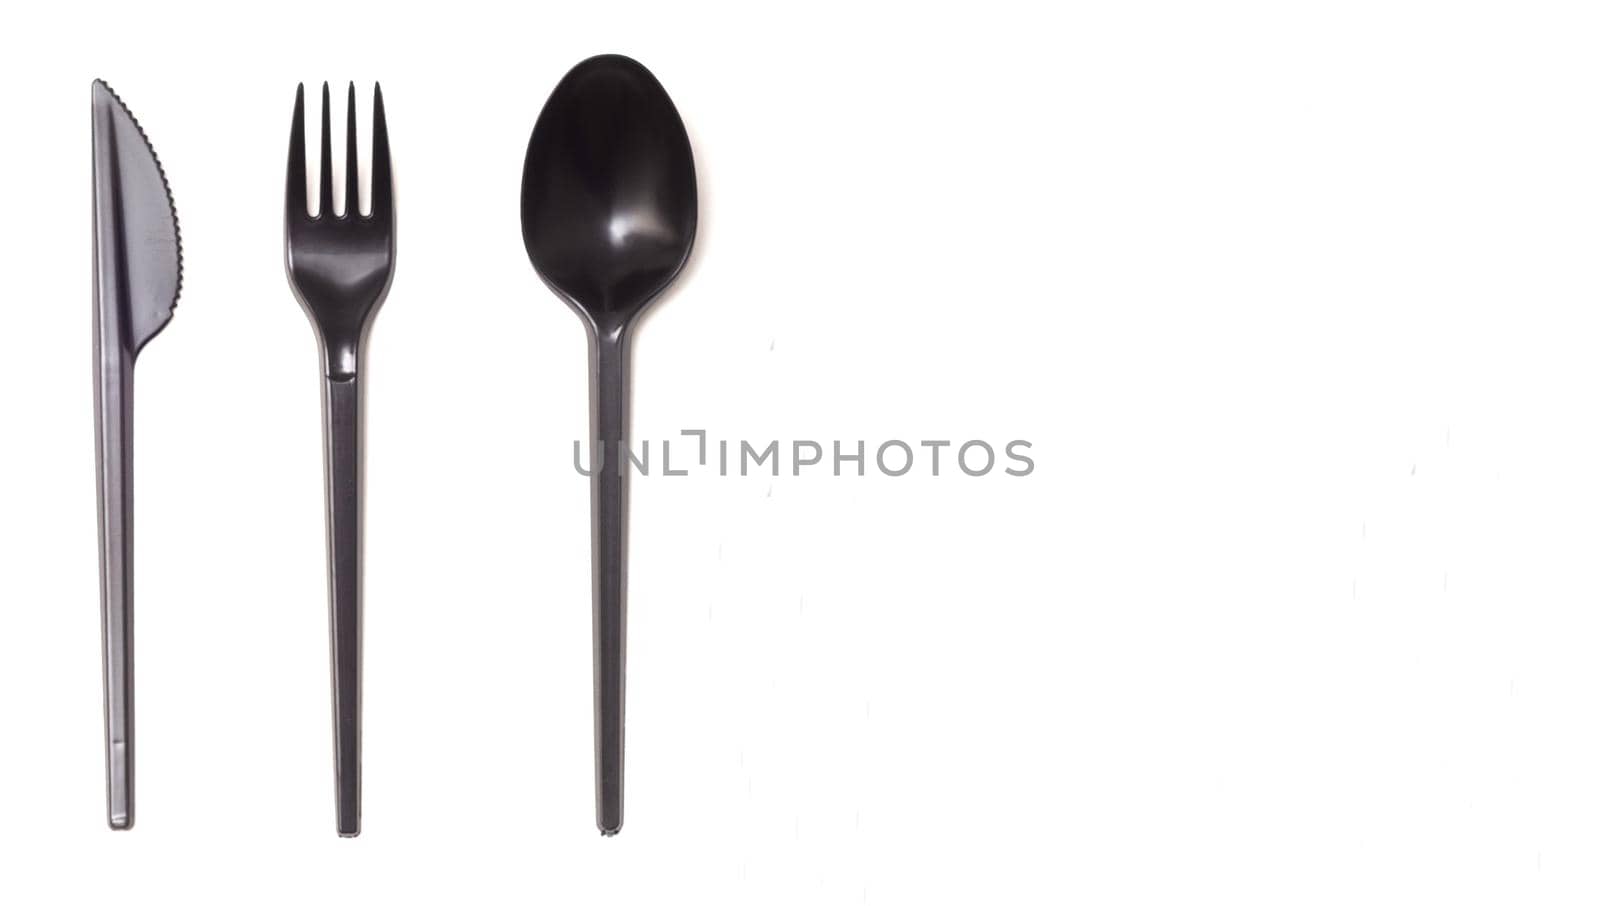 black plastic disposable knife,spoon and fork on white background. by andre_dechapelle